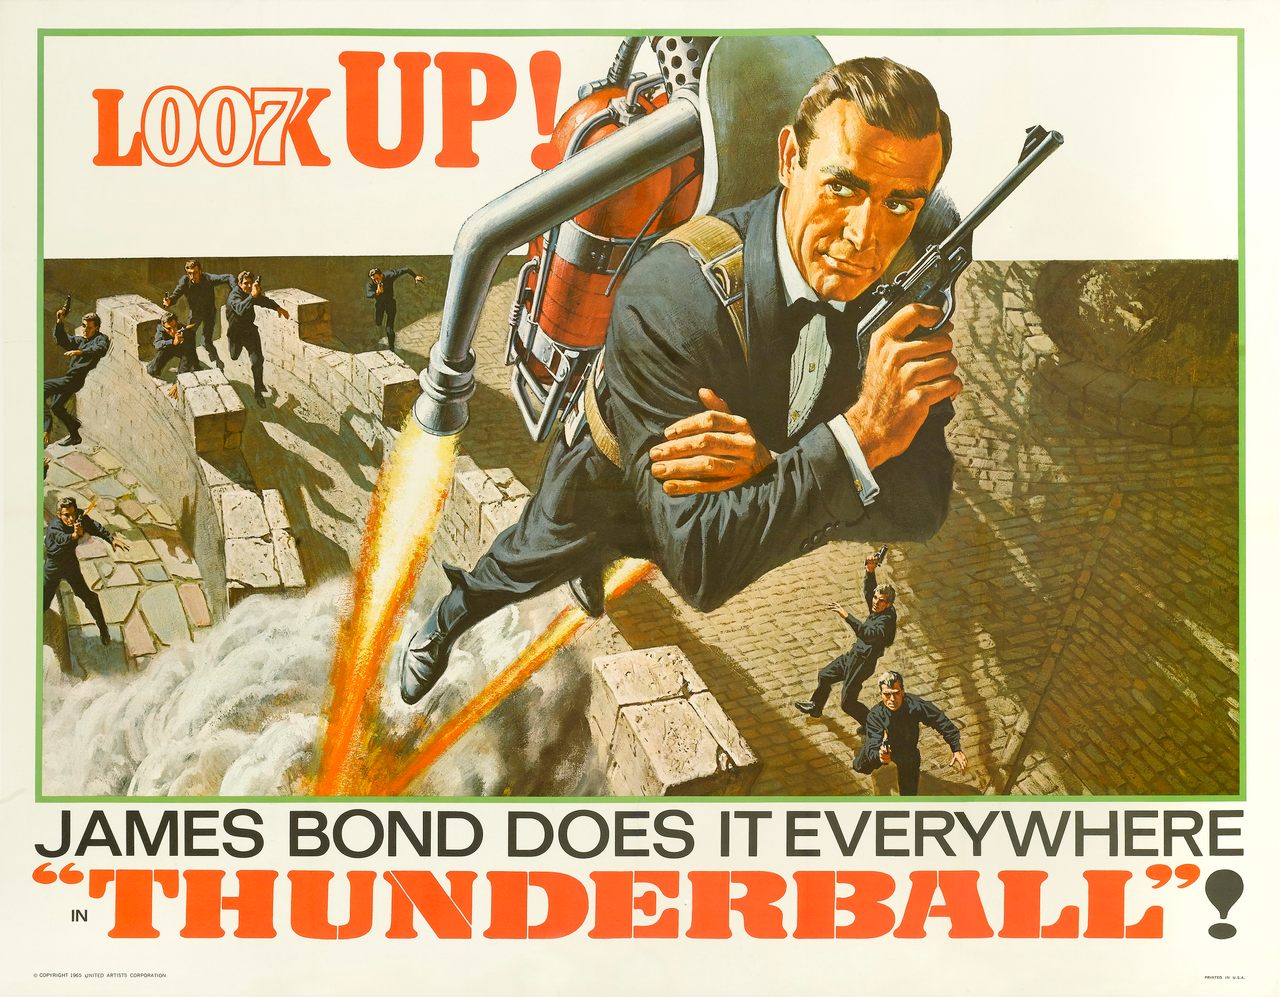 In Terence Young's 1965 <em>Thunderball</em>, James Bond (played by Sean Connery) makes a quick getaway using a futuristic jetpack.